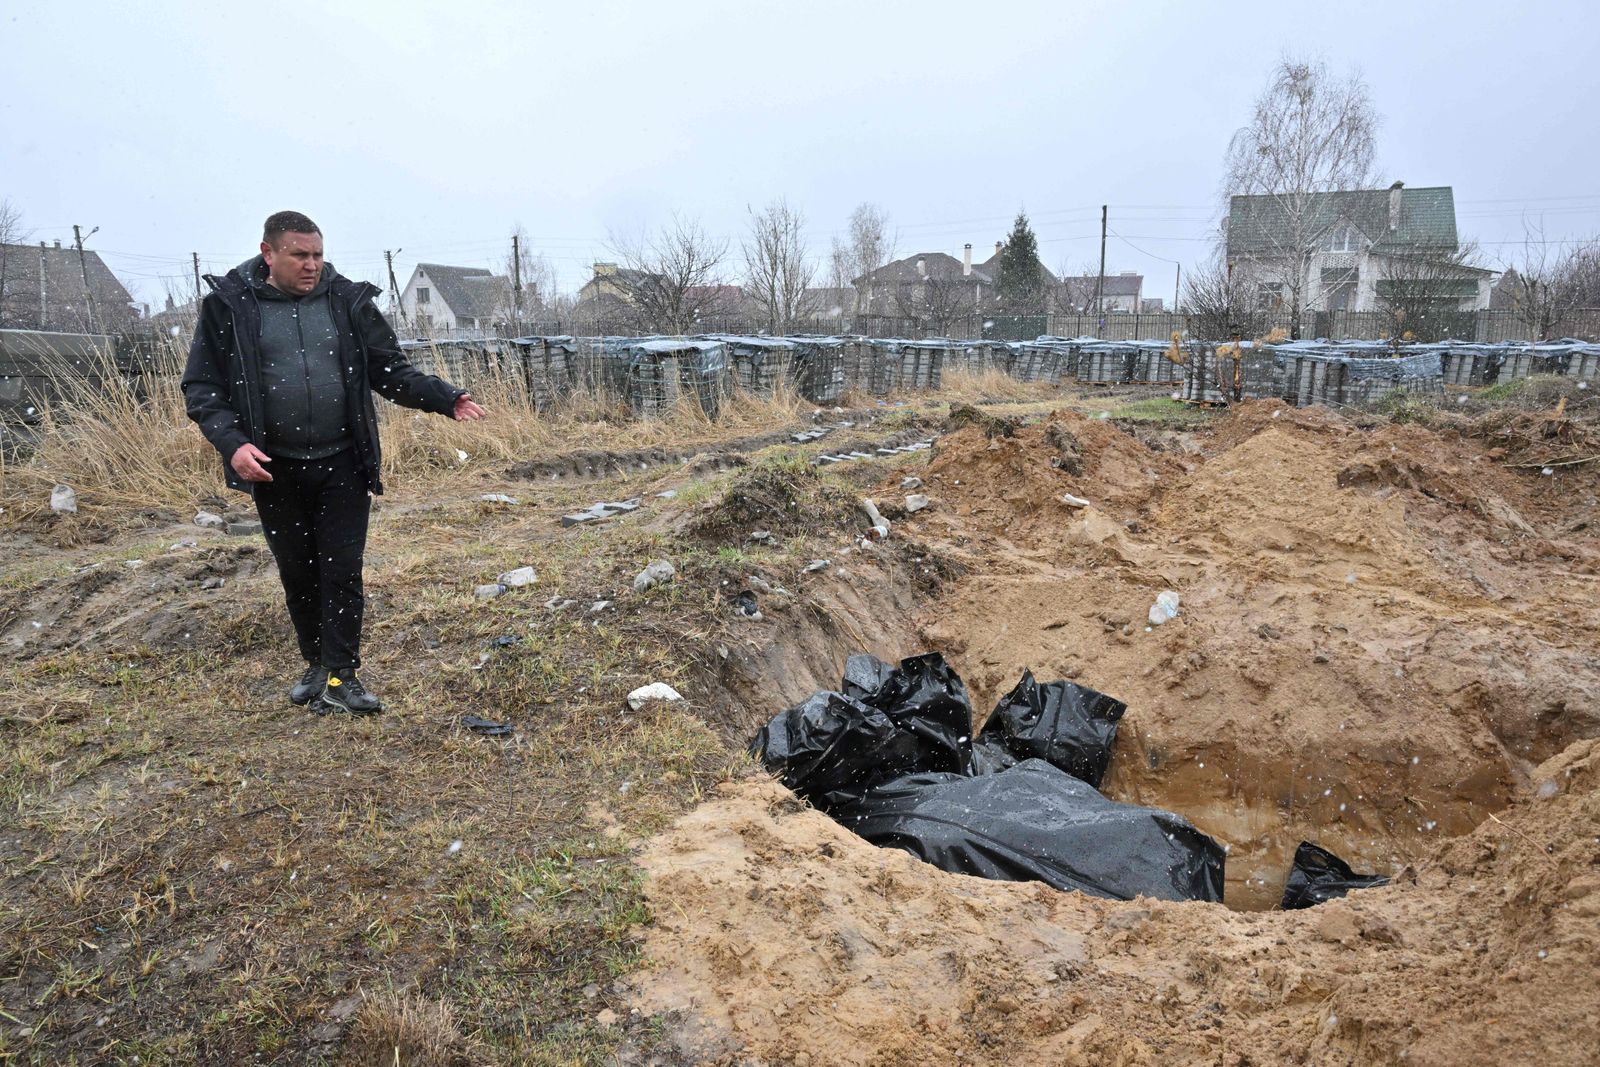 A man gestures at a mass grave in the town of Bucha, northwest of the Ukrainian capital Kyiv on April 3, 2022. - Ukraine and Western nations accused Russian troops of war crimes after the discovery of mass graves and 